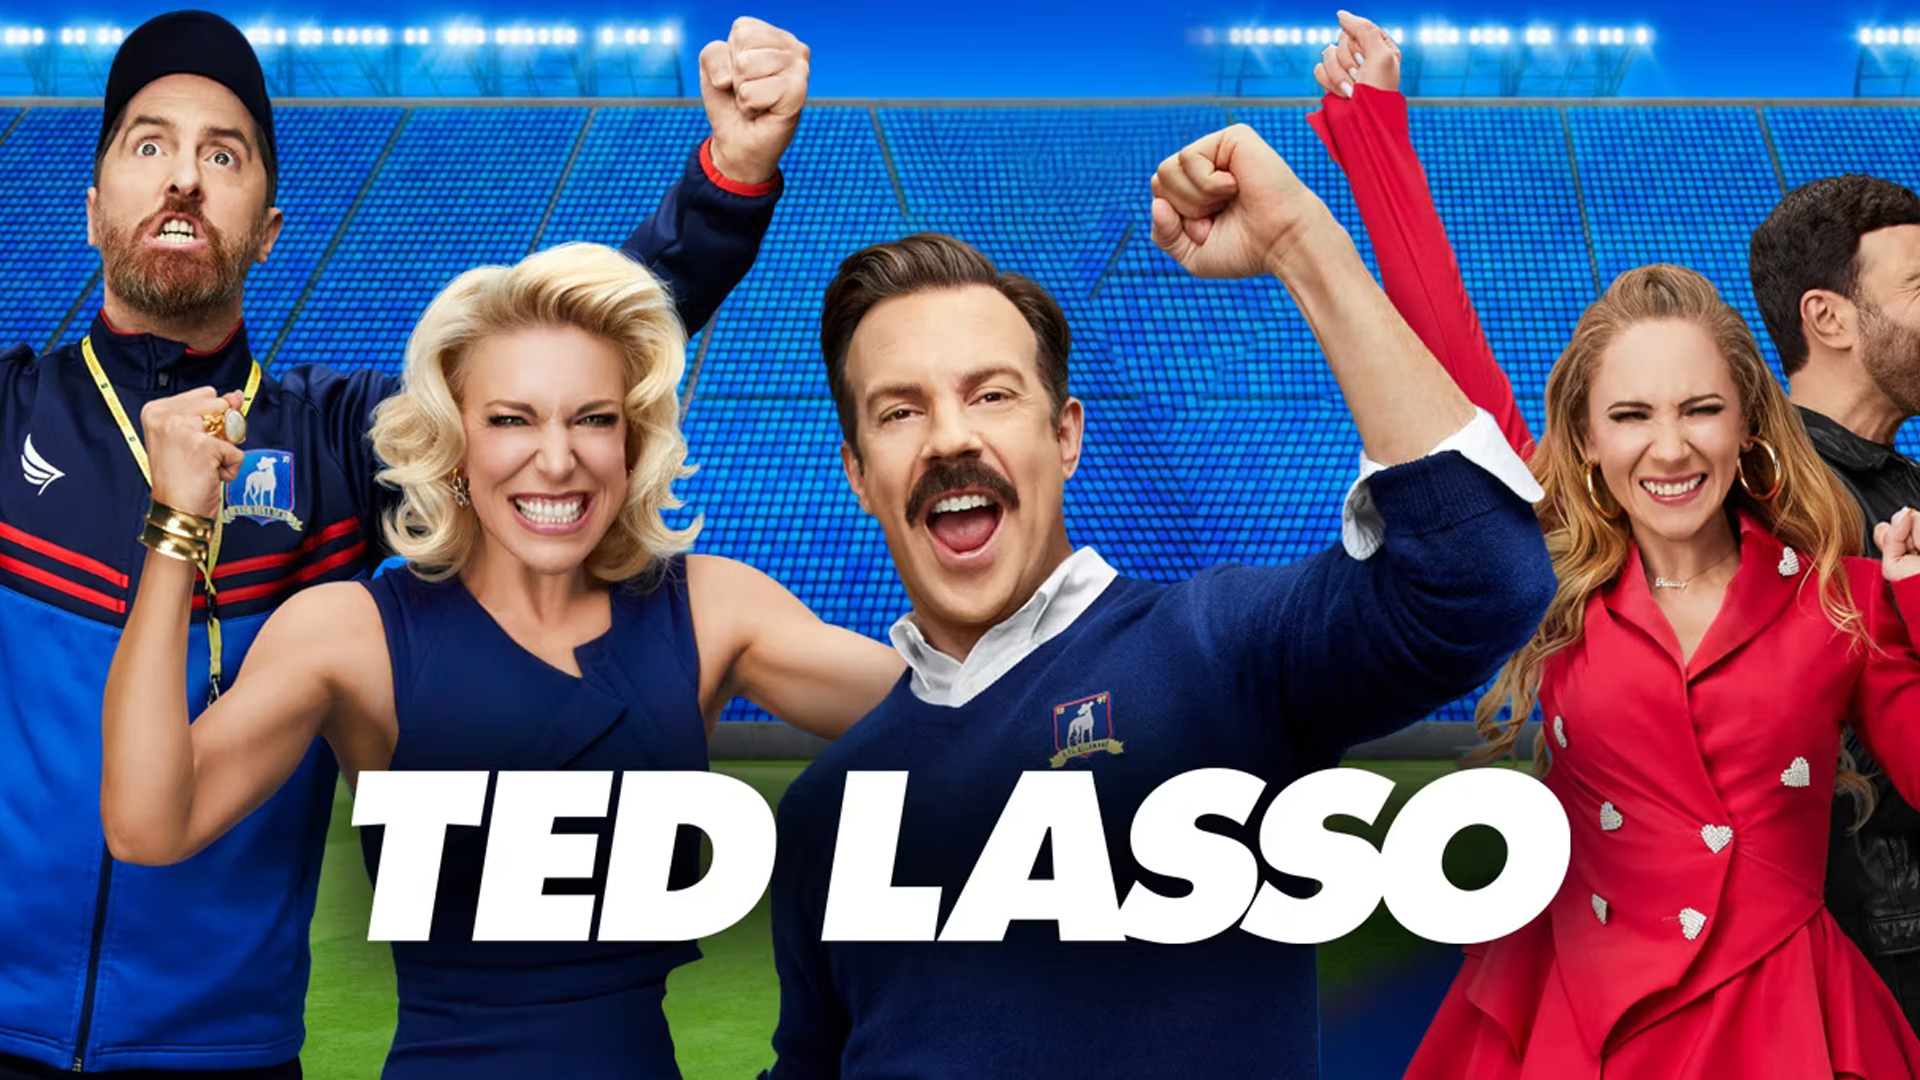 Is Ted Lasso Season 3 Going to be the Last?